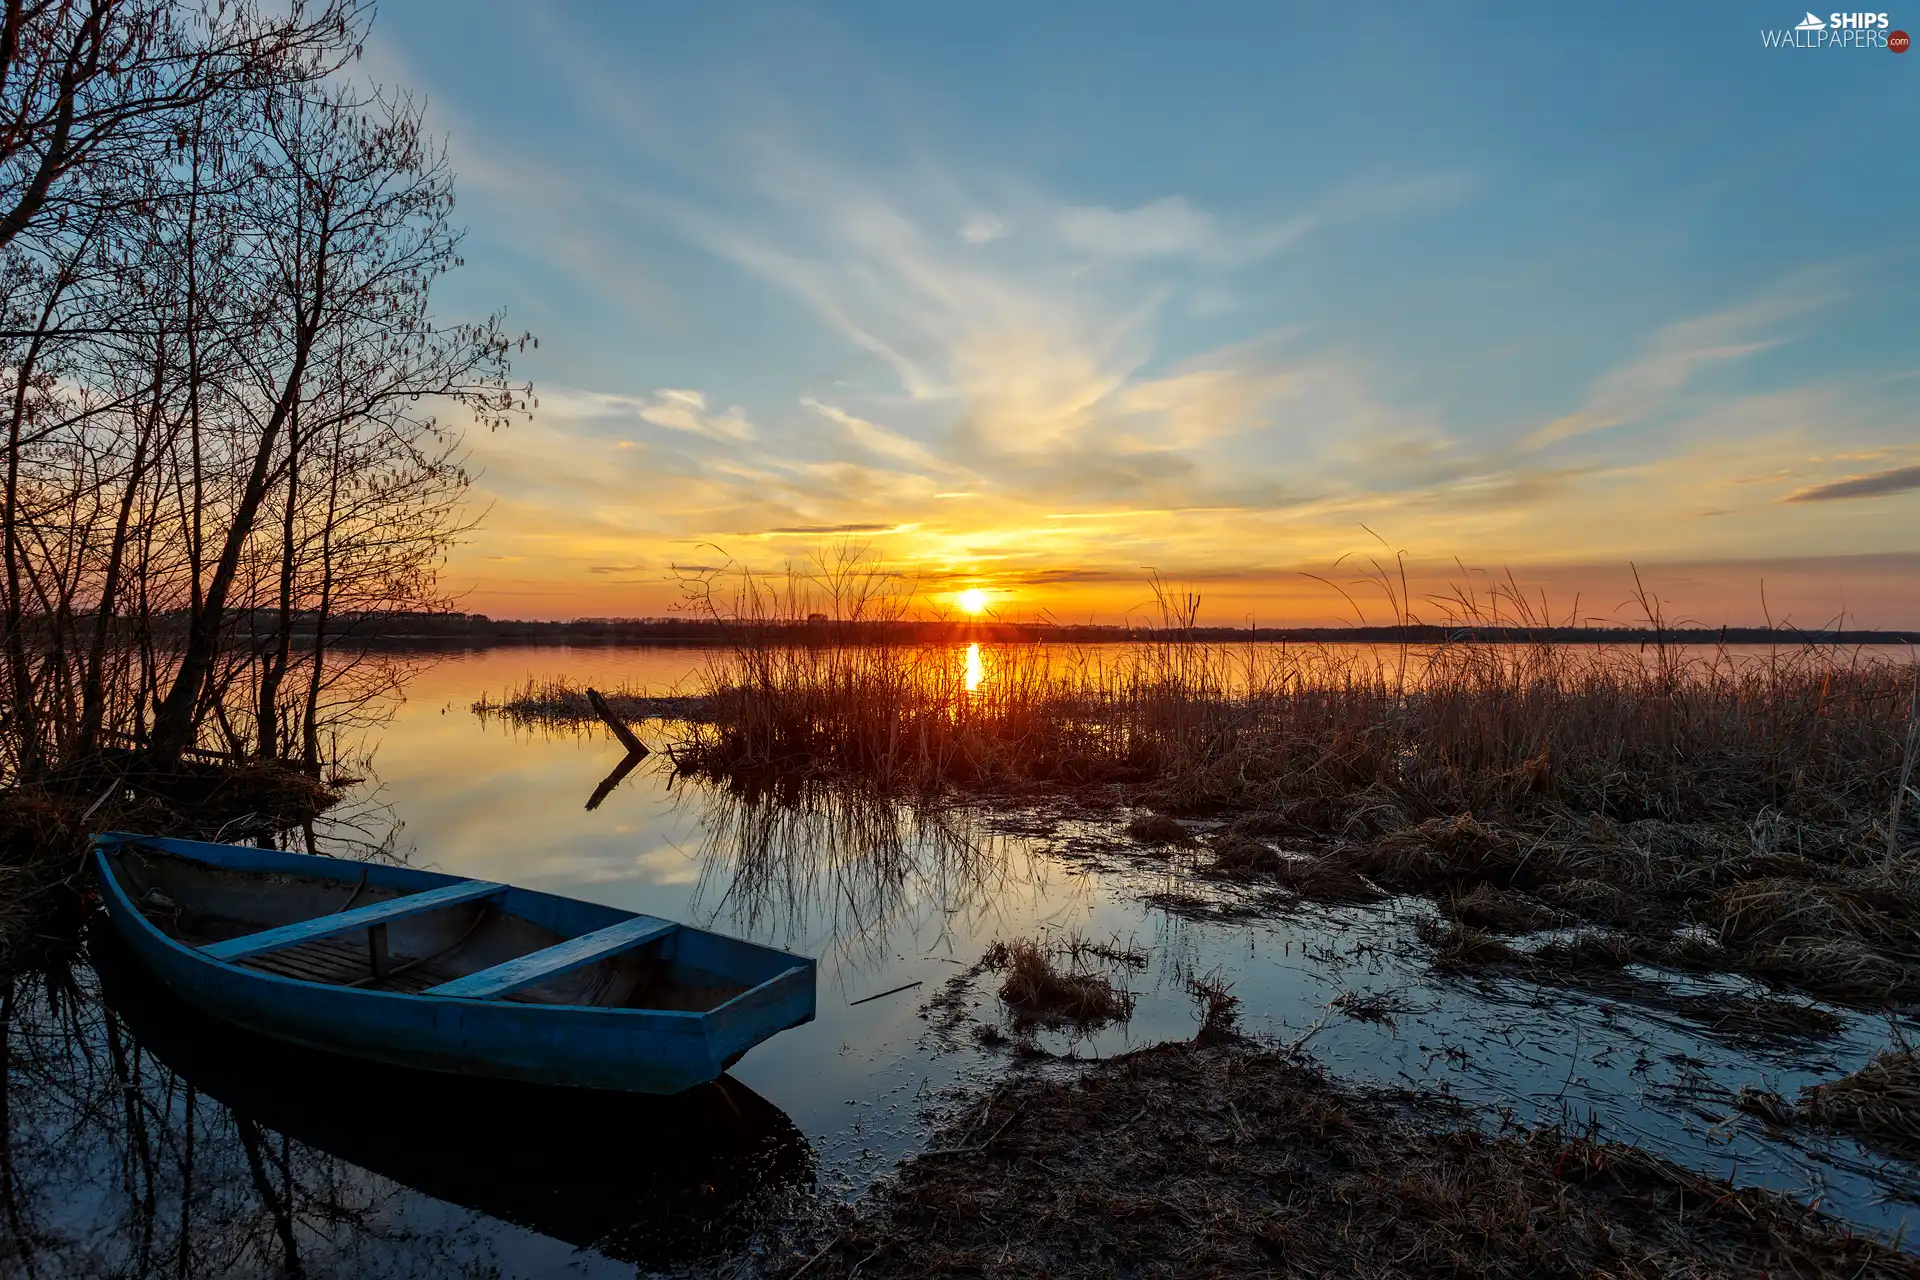 viewes, Great Sunsets, Boat, trees, lake